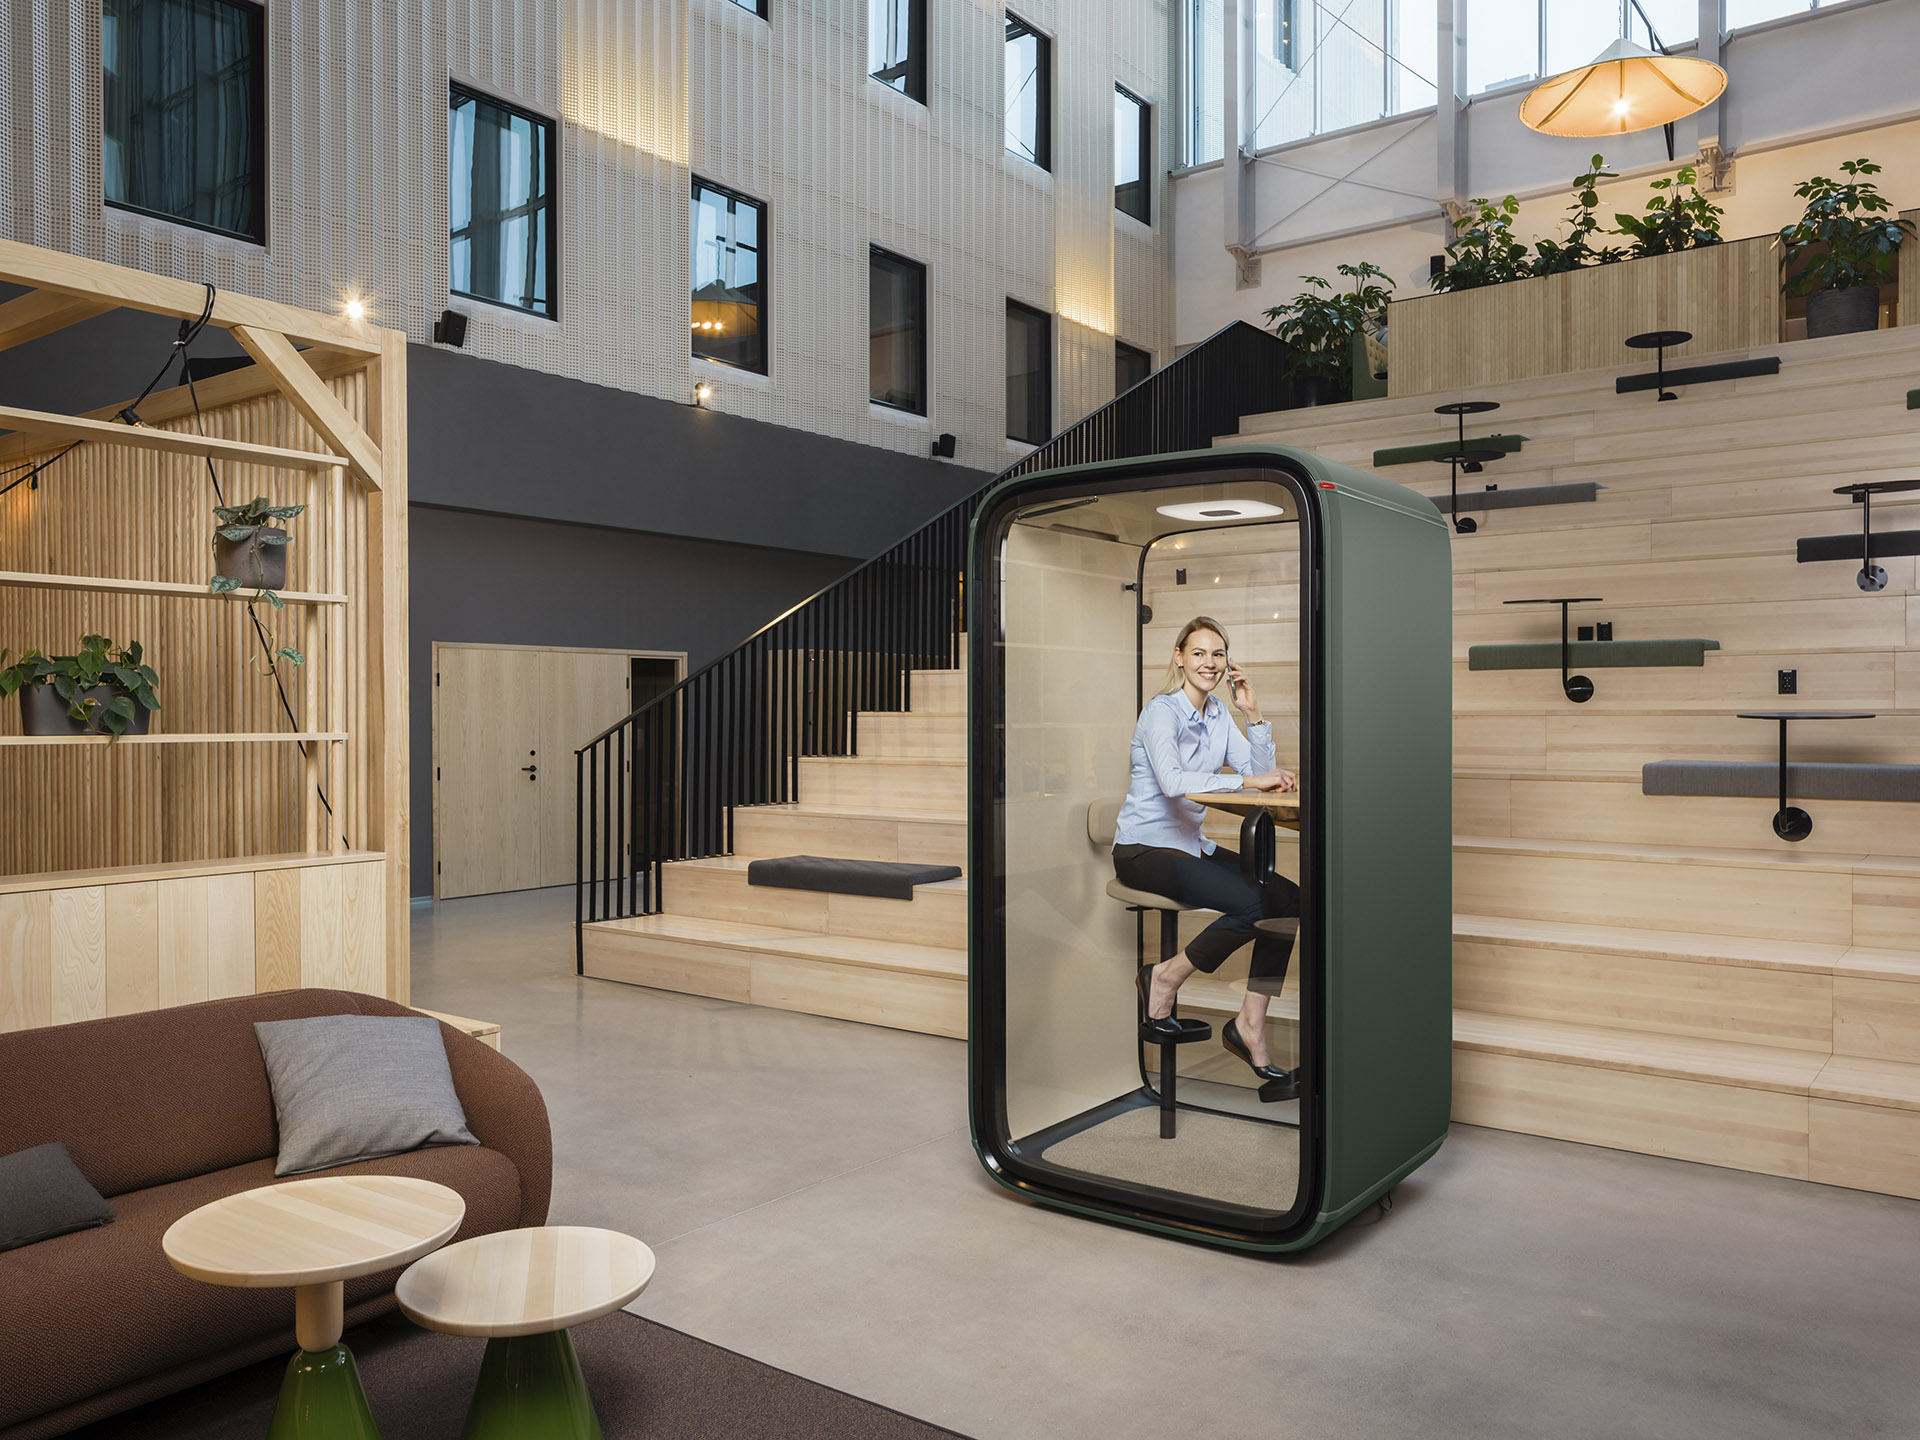 Telephone booth for offices. Design and technology to prepare for the growing demand for video conferencing